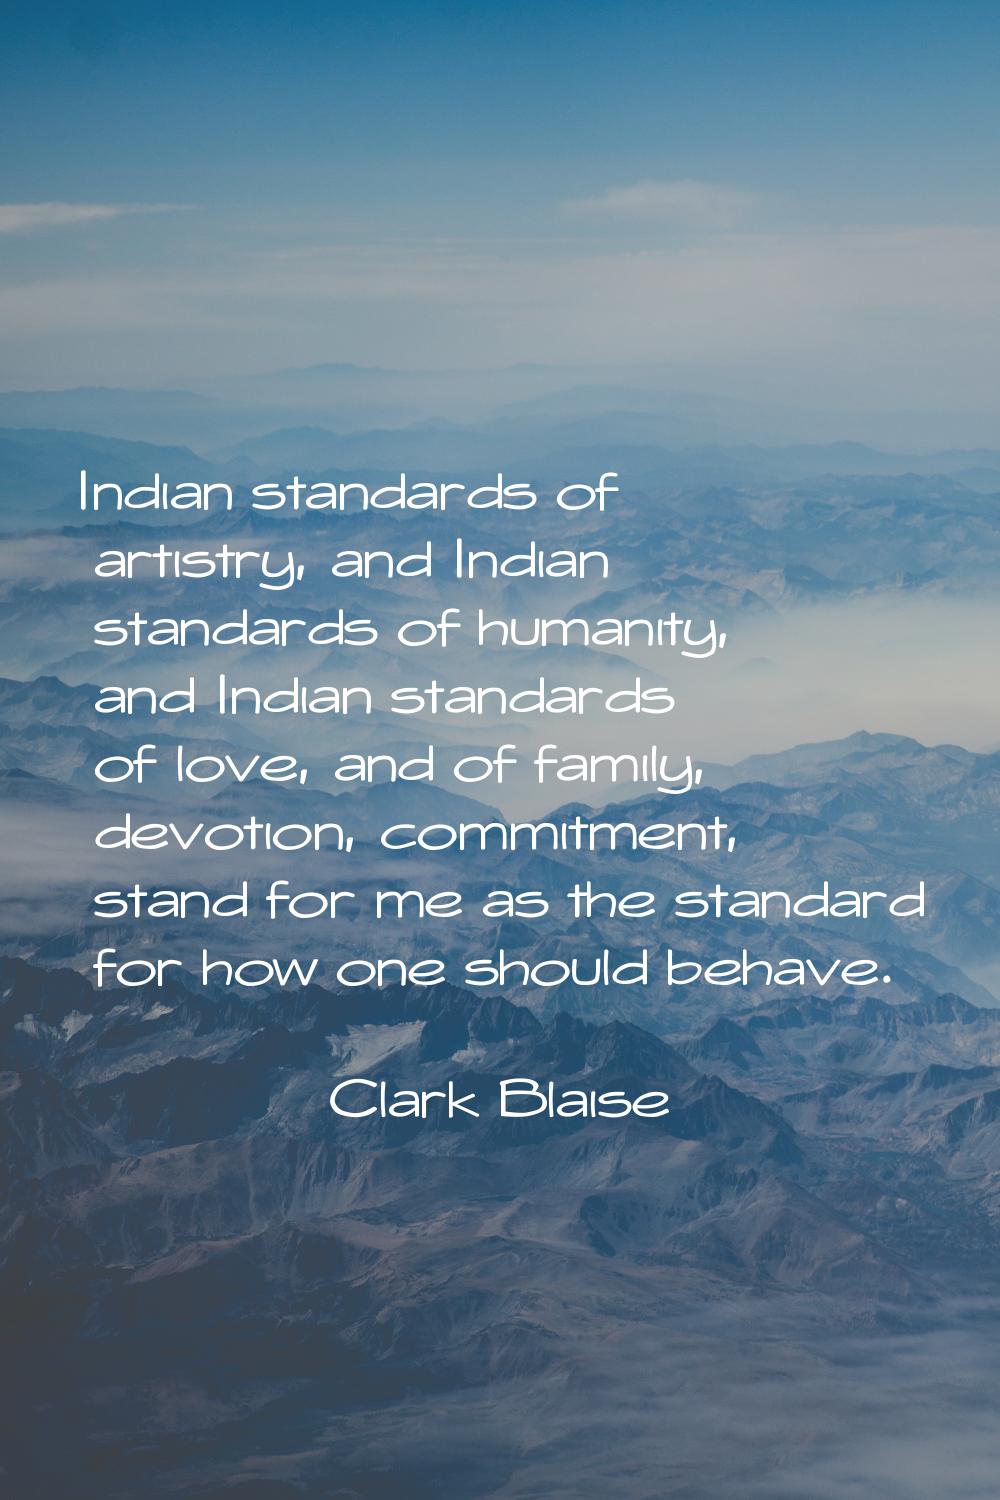 Indian standards of artistry, and Indian standards of humanity, and Indian standards of love, and o